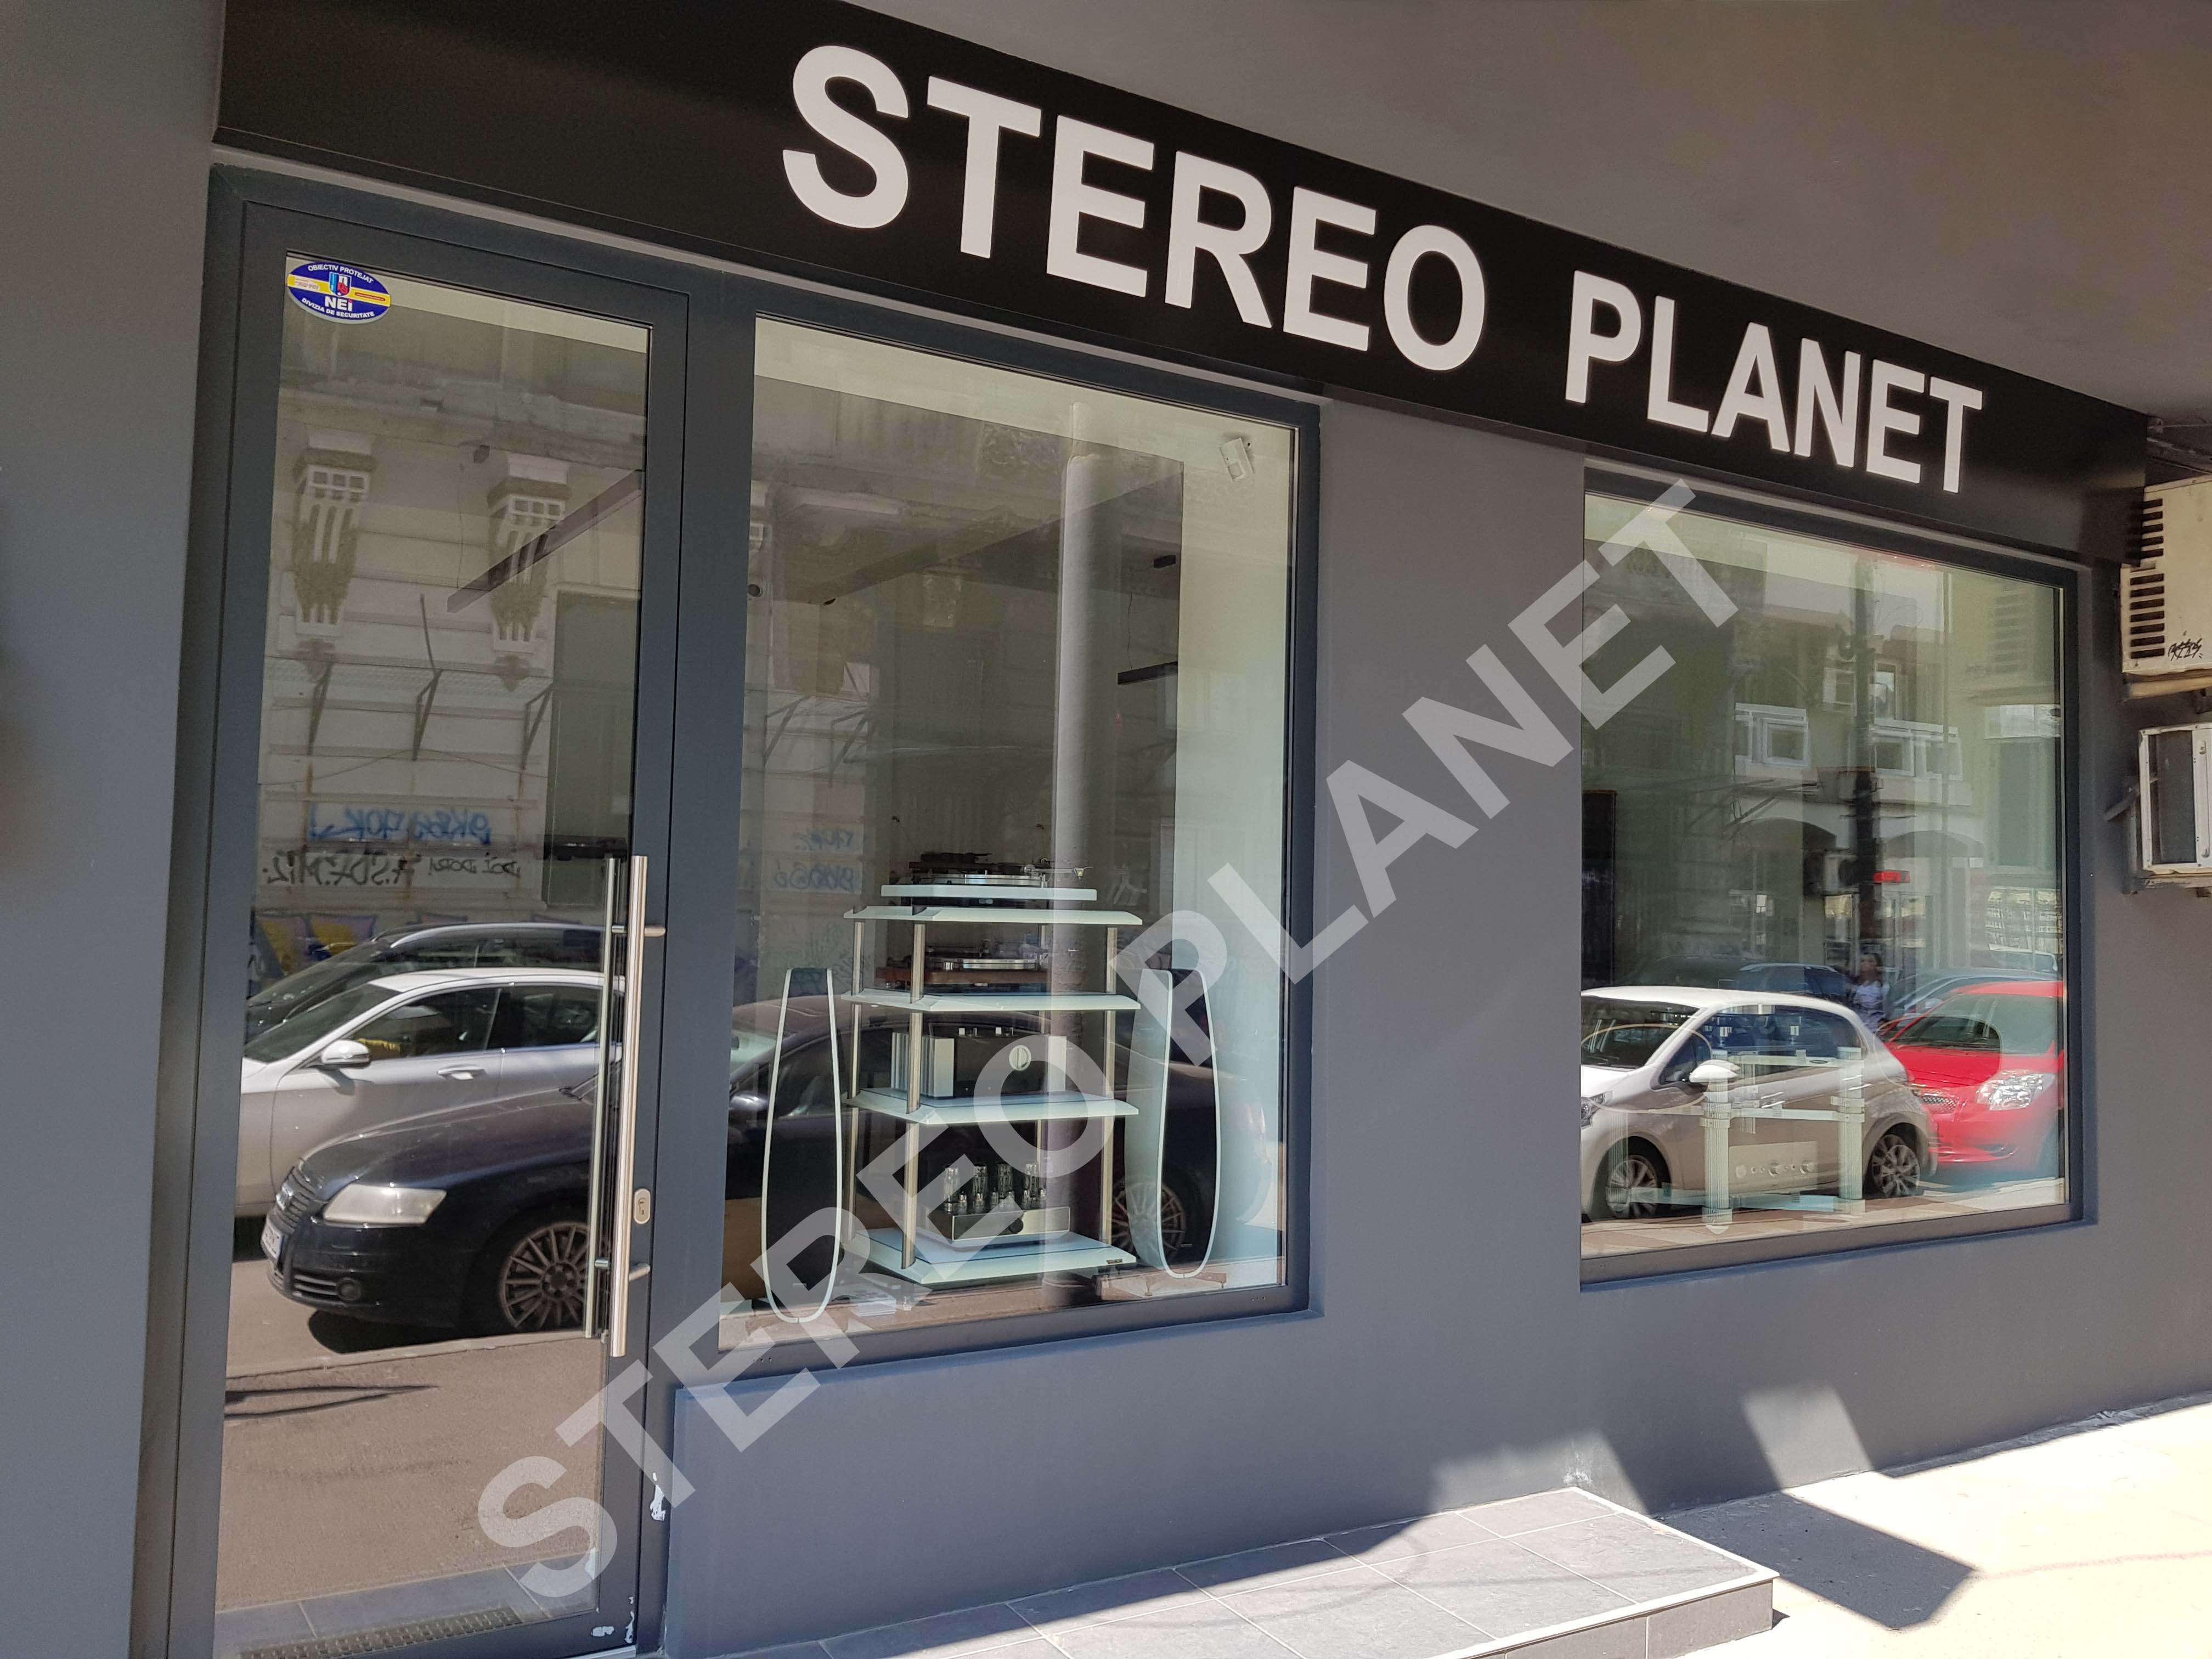 STEREO PLANET